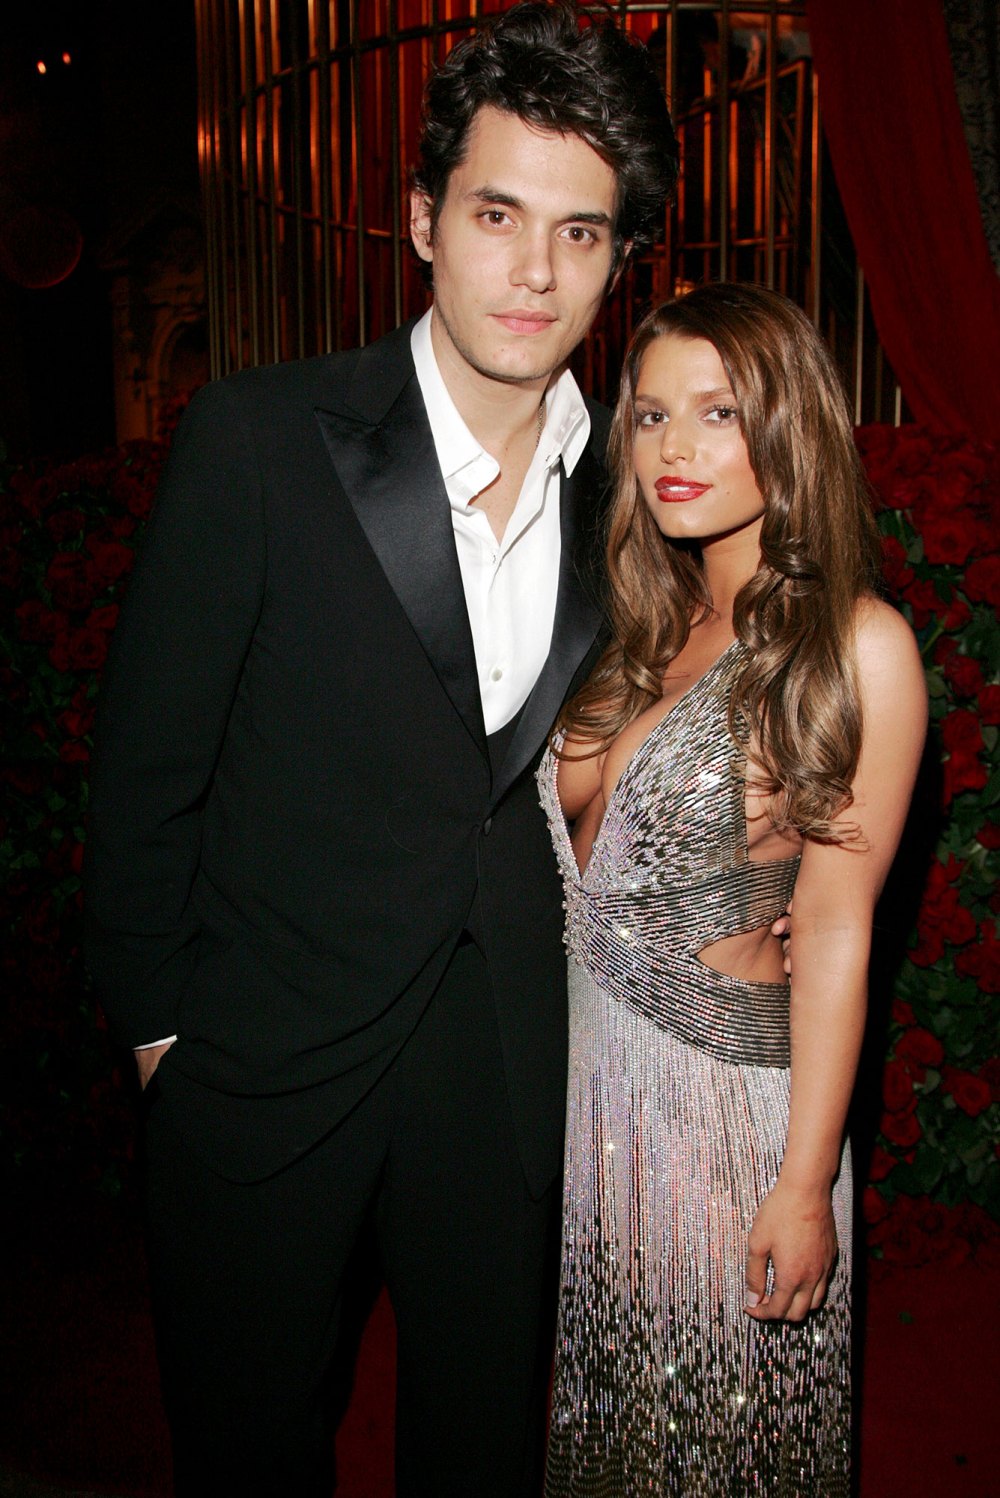 John Mayer Most Controversial Moments Through the Years Jessica Simpson